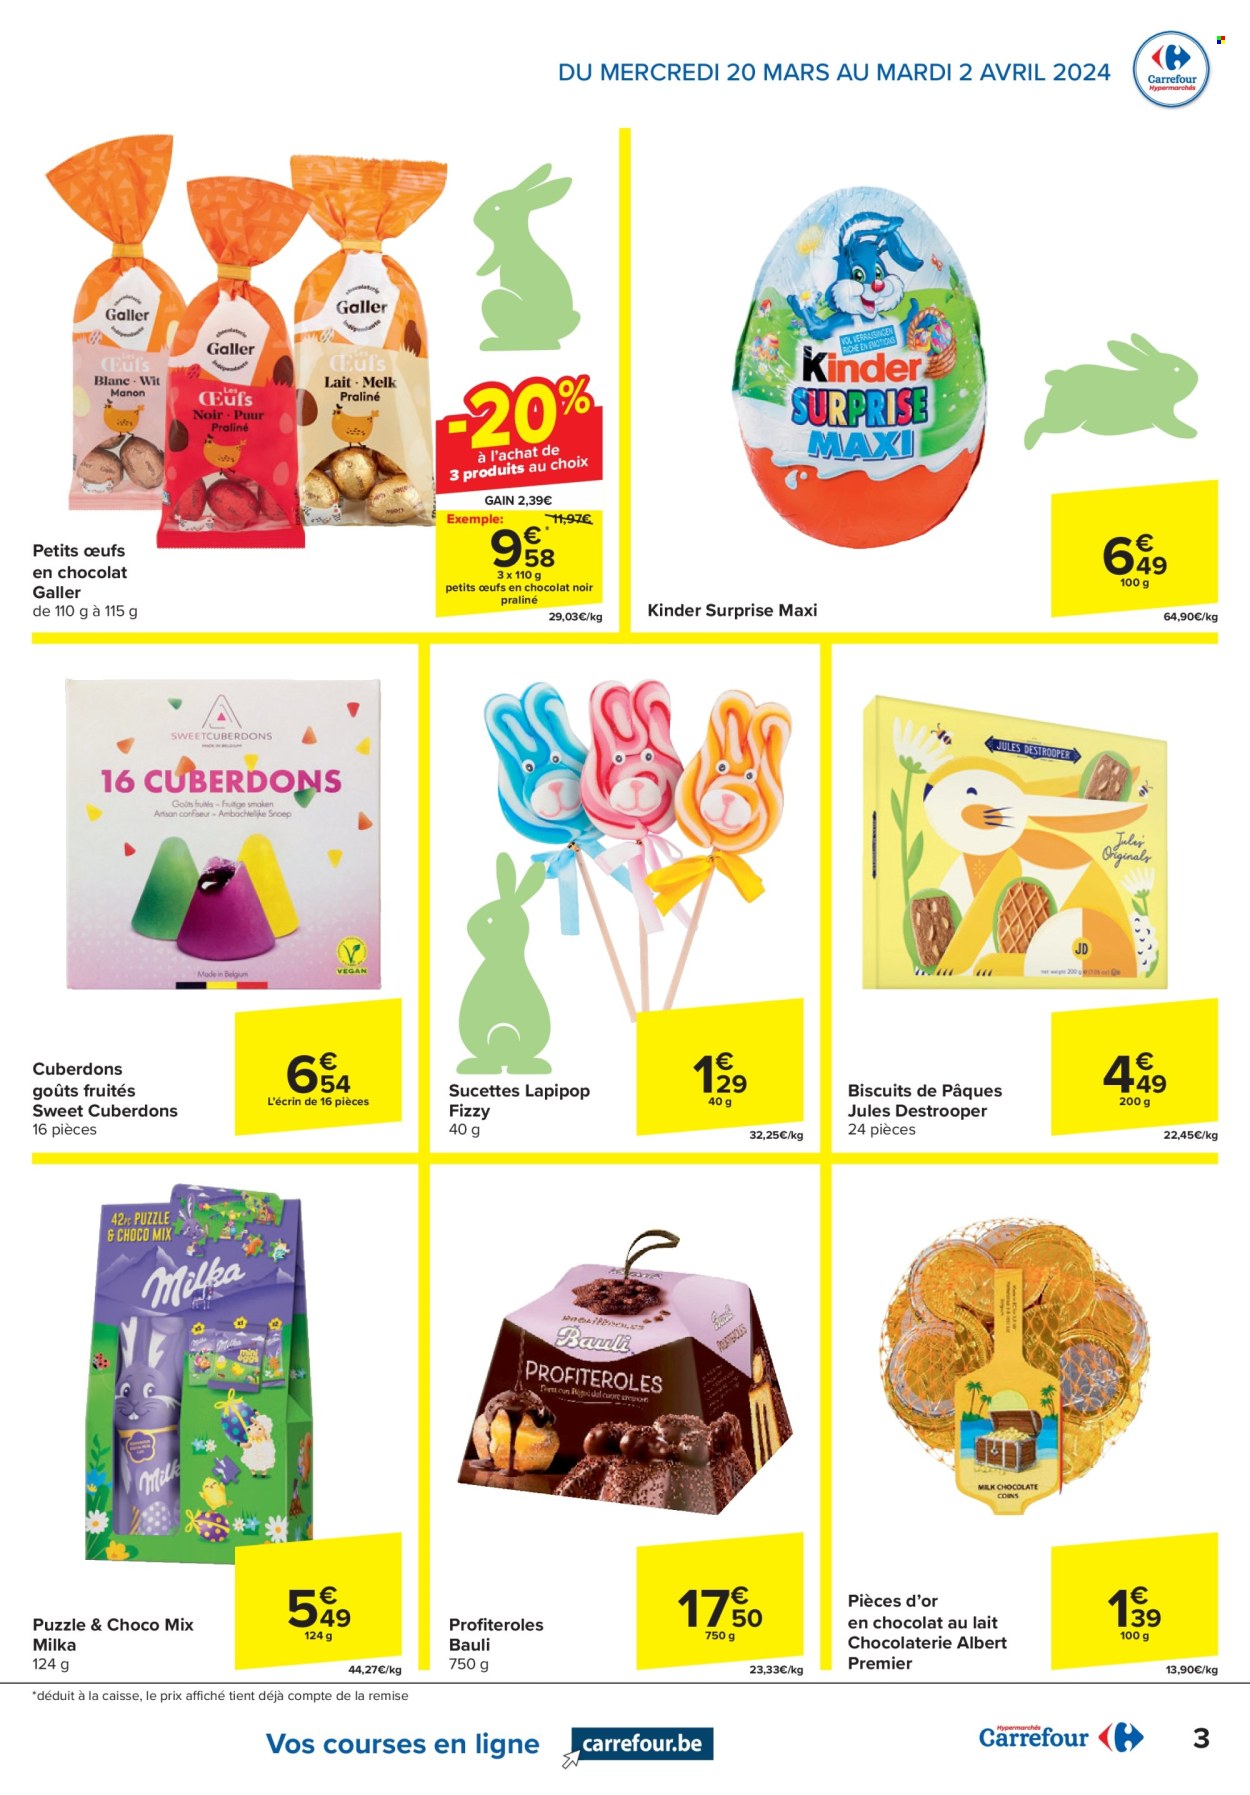 Catalogue Carrefour hypermarkt - 20.3.2024 - 2.4.2024. Page 3.